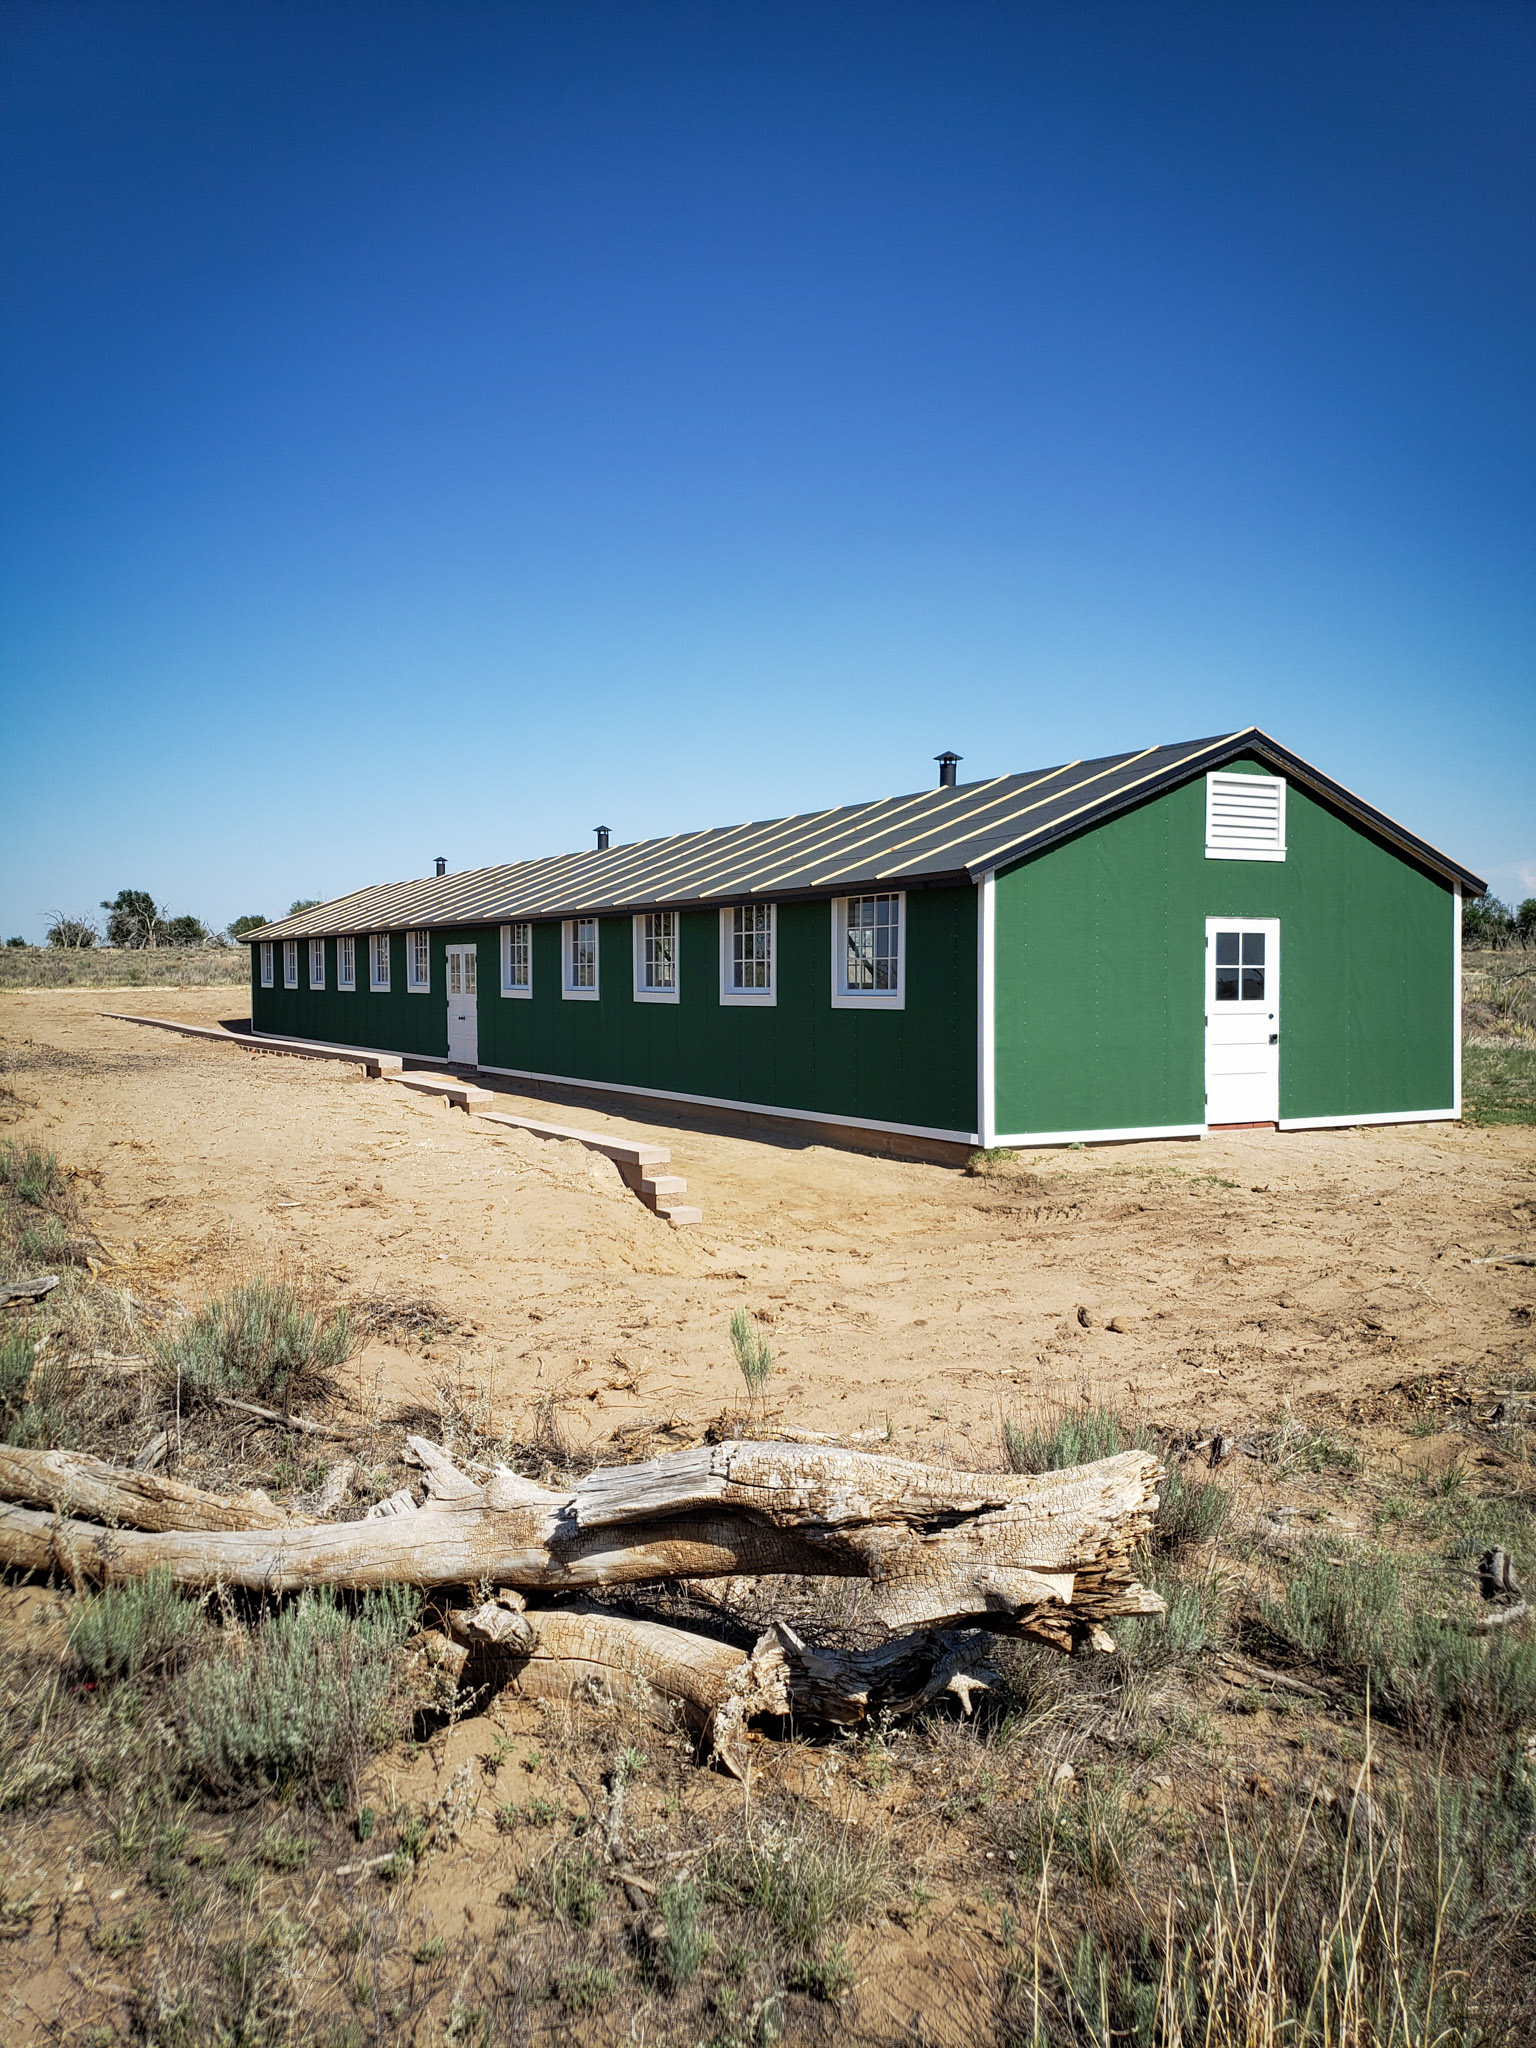 photo of the completely restored Amache camp recreation building in the distance. The long green building with white trim is contrasted against the flat arid land surrounding it.